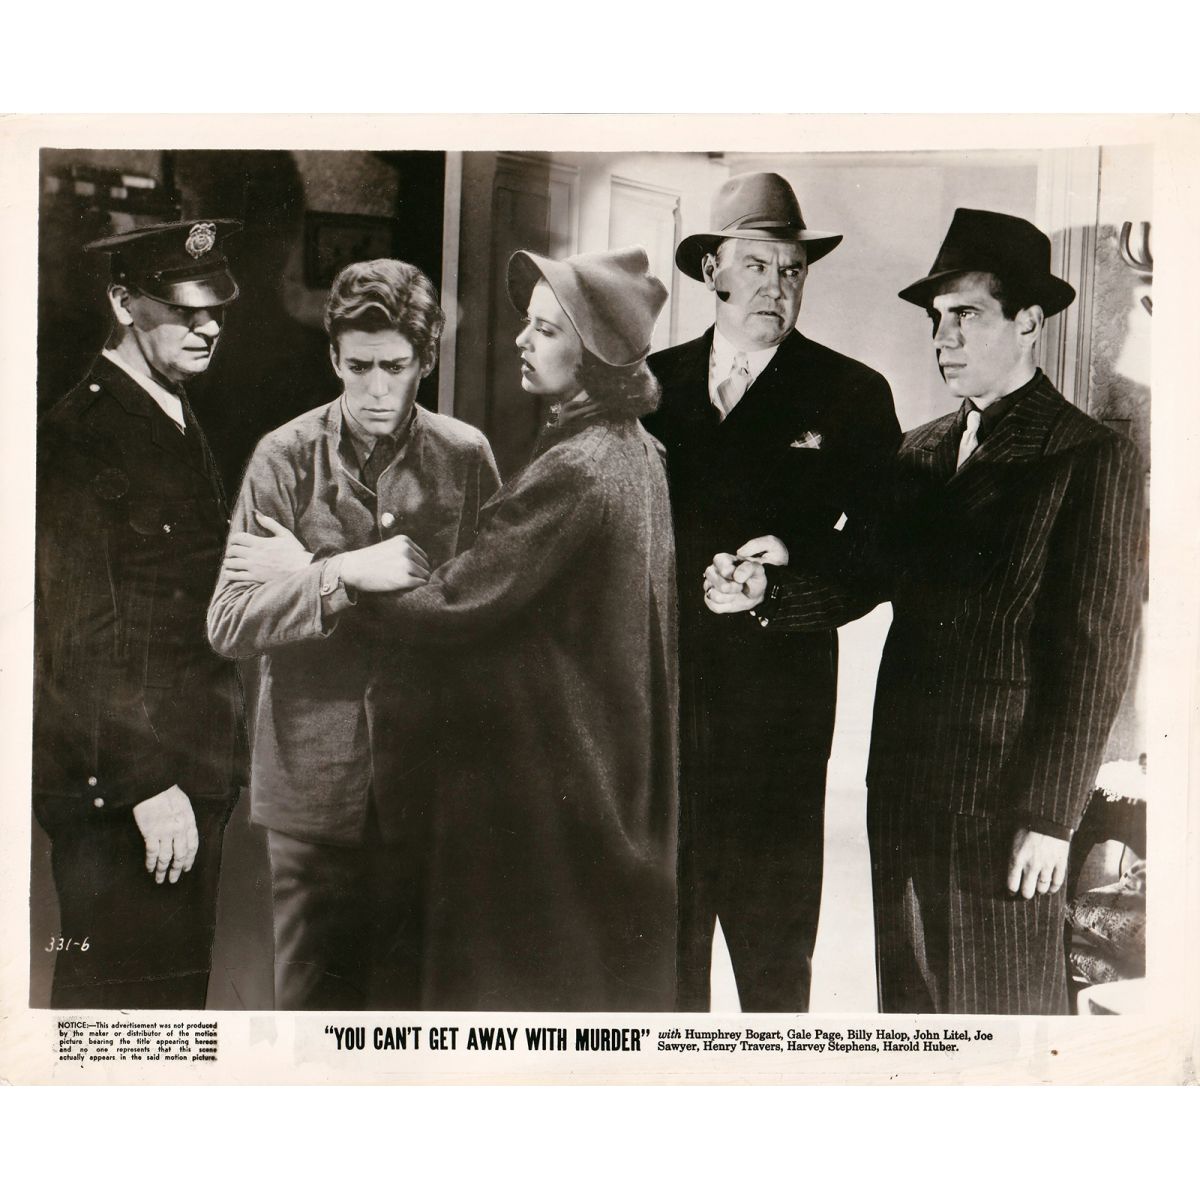 YOU CAN'T GET AWAY WITH MURDER U.S. Movie Still - 8x10 in. - 1939 331-6